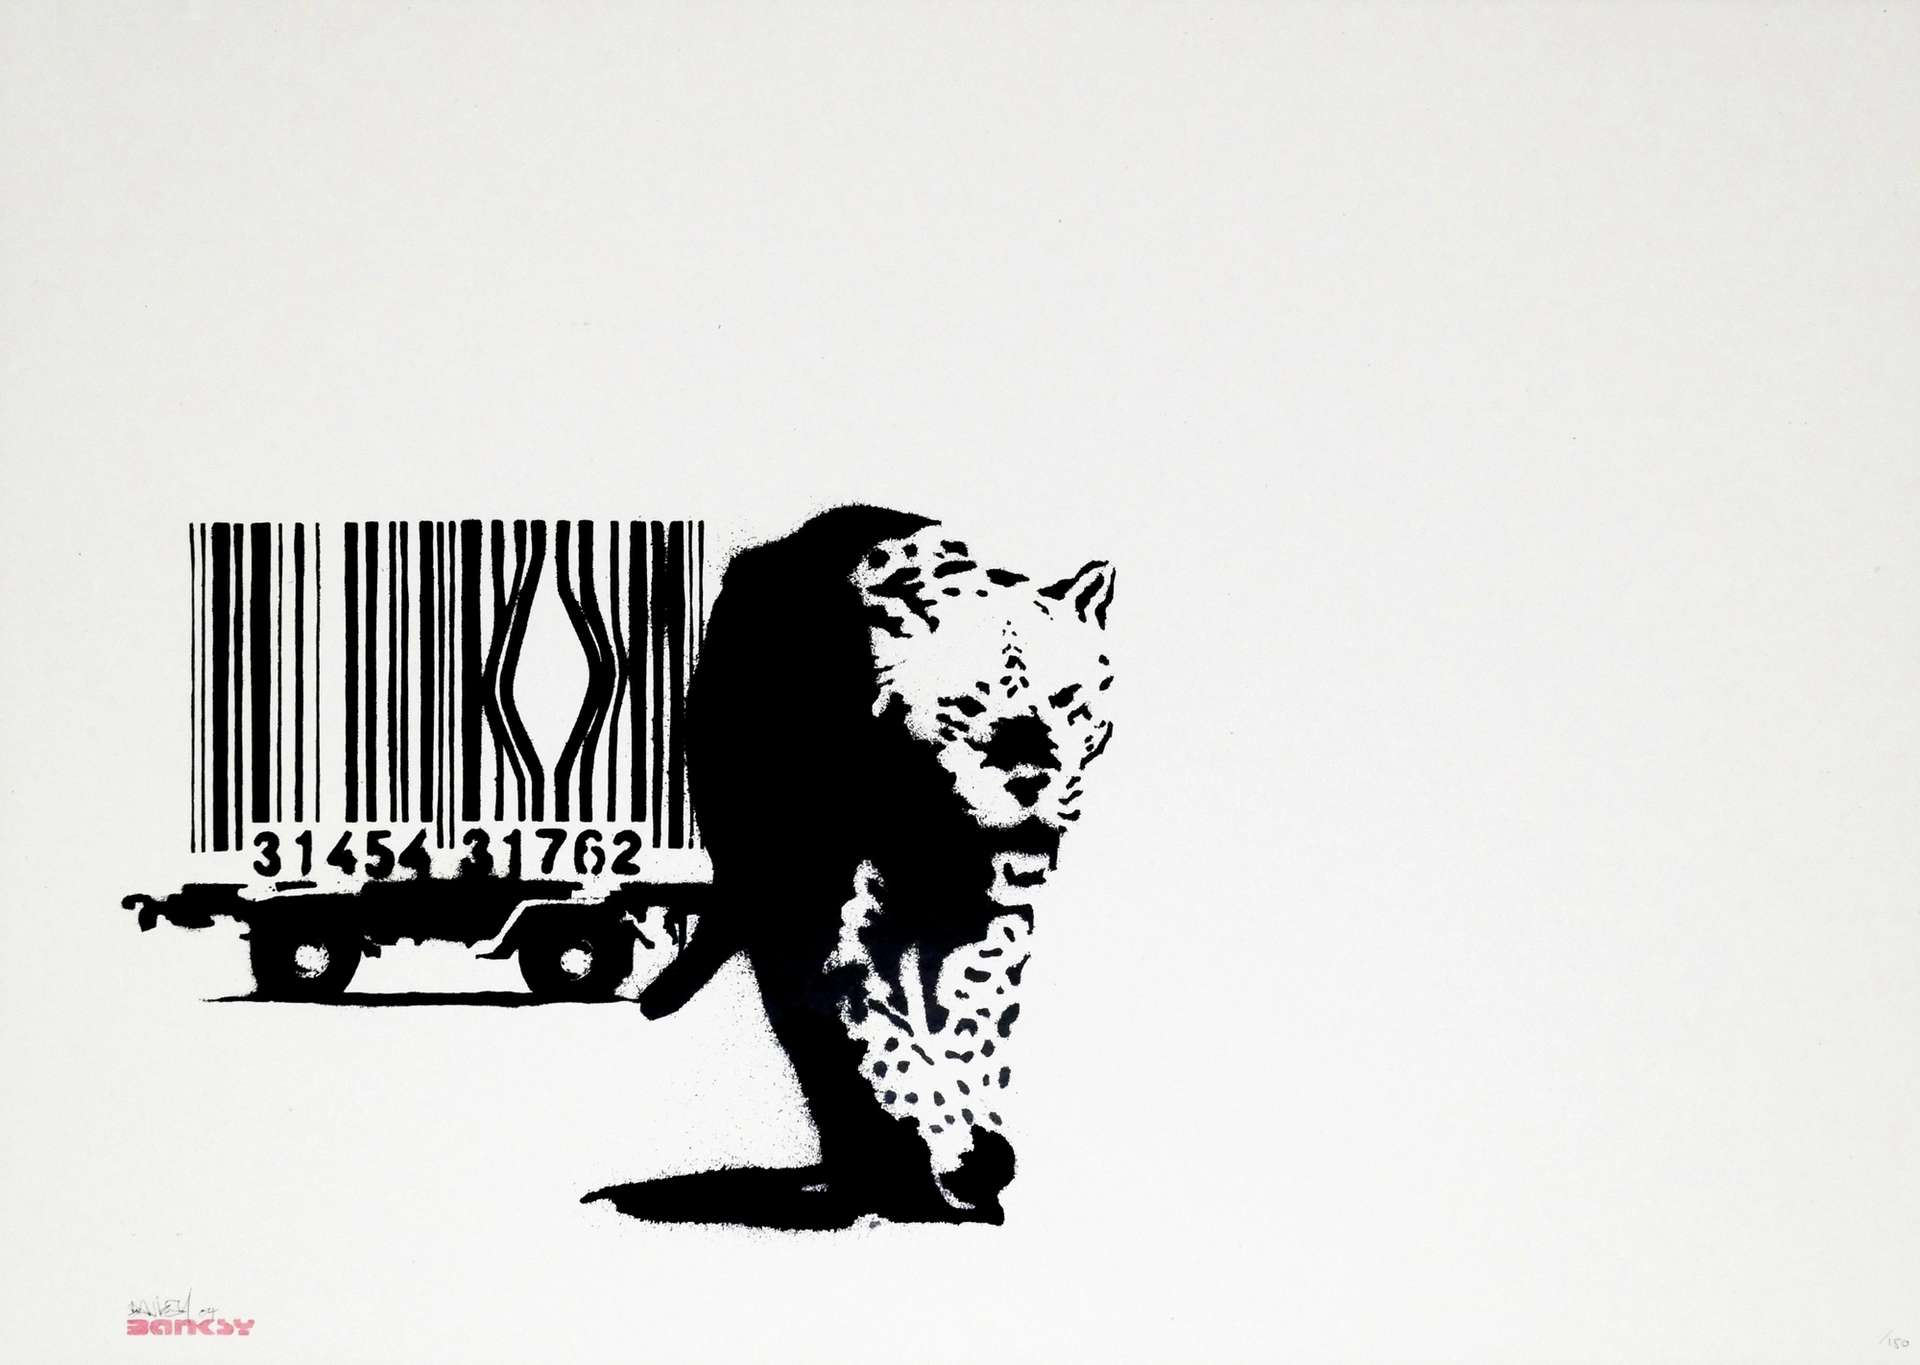 A screenprint in black and white by Banksy depicting a leopard prowling towards the viewer, emerging from a cage which is constructed from the lines of a barcode.